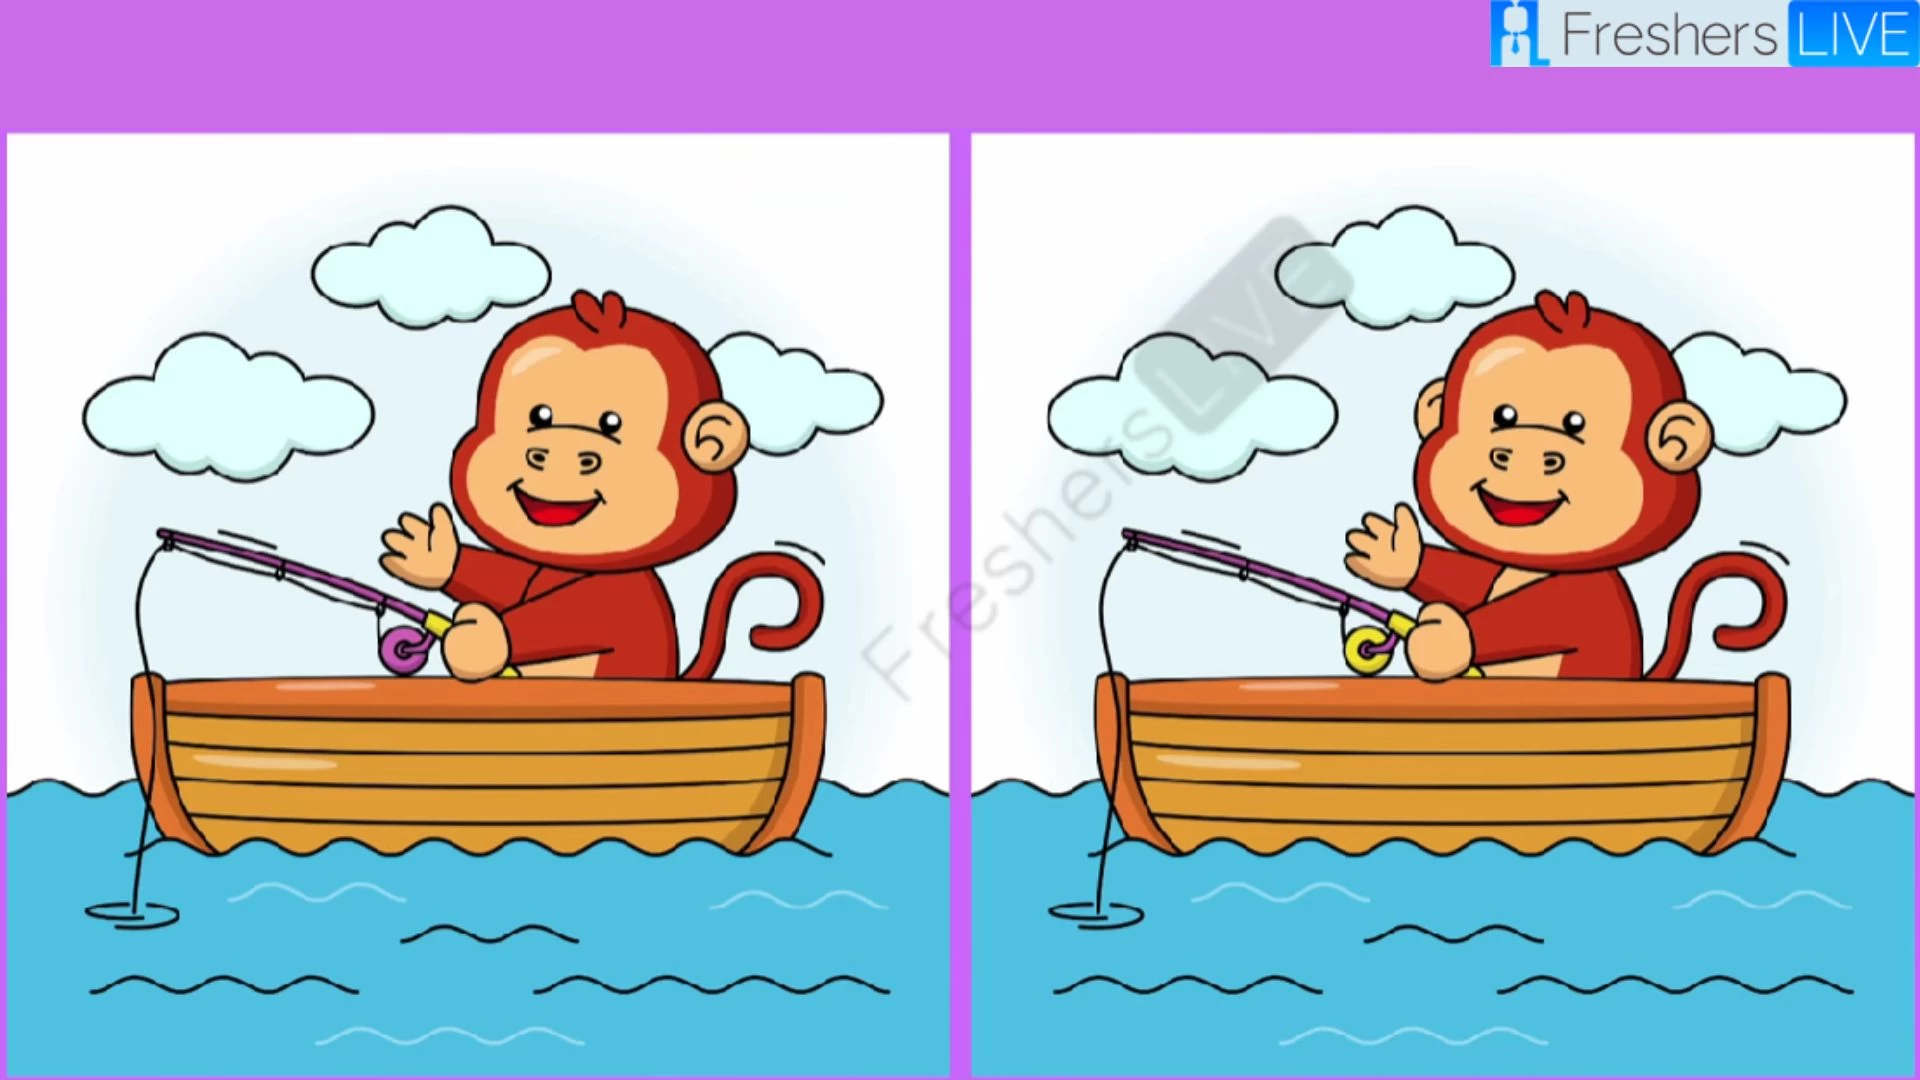 Can You Spot the 3 Differences in this Monkey Picture in Just 15 Seconds?  Challenge for the 5% Geniuses!